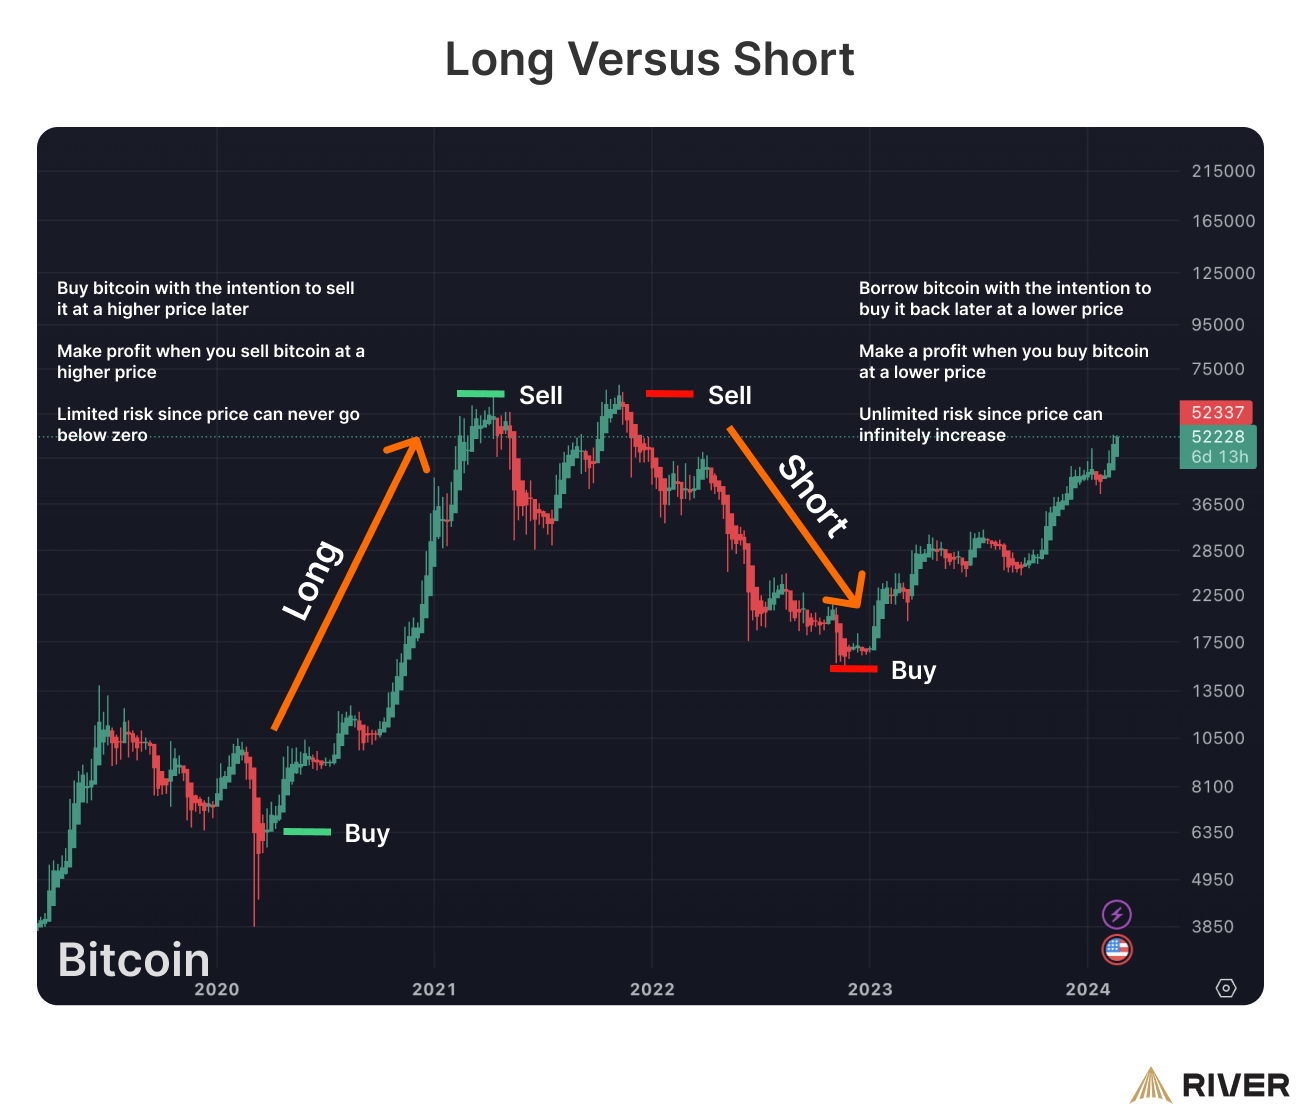 Chart comparison of Bitcoin investment strategies: ‘Long’ position buying low and selling high with limited risk, versus ‘Short’ position selling high and buying low with unlimited risk.